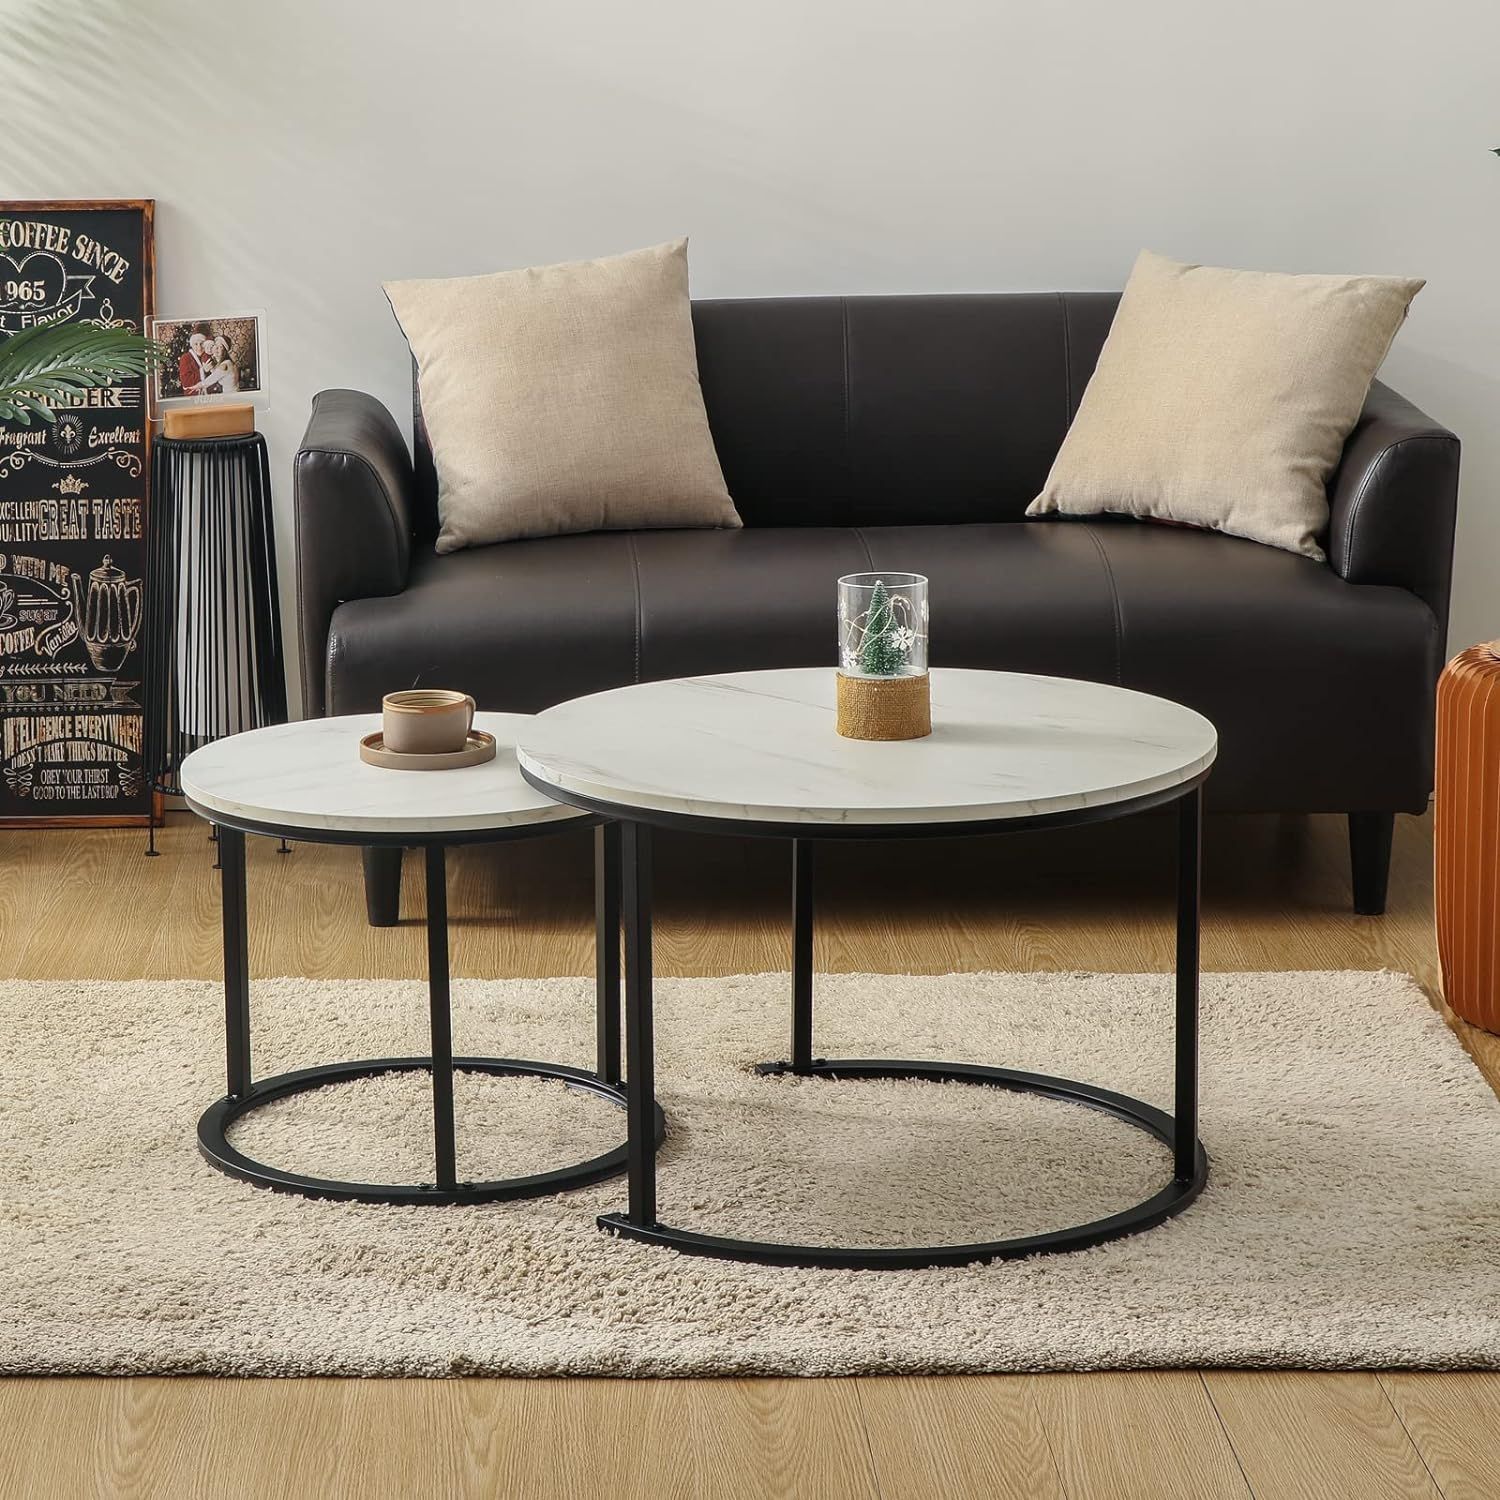 Modern Nesting Coffee Table Set Of 2 For Living India | Ubuy Within Modern Nesting Coffee Tables (View 13 of 15)